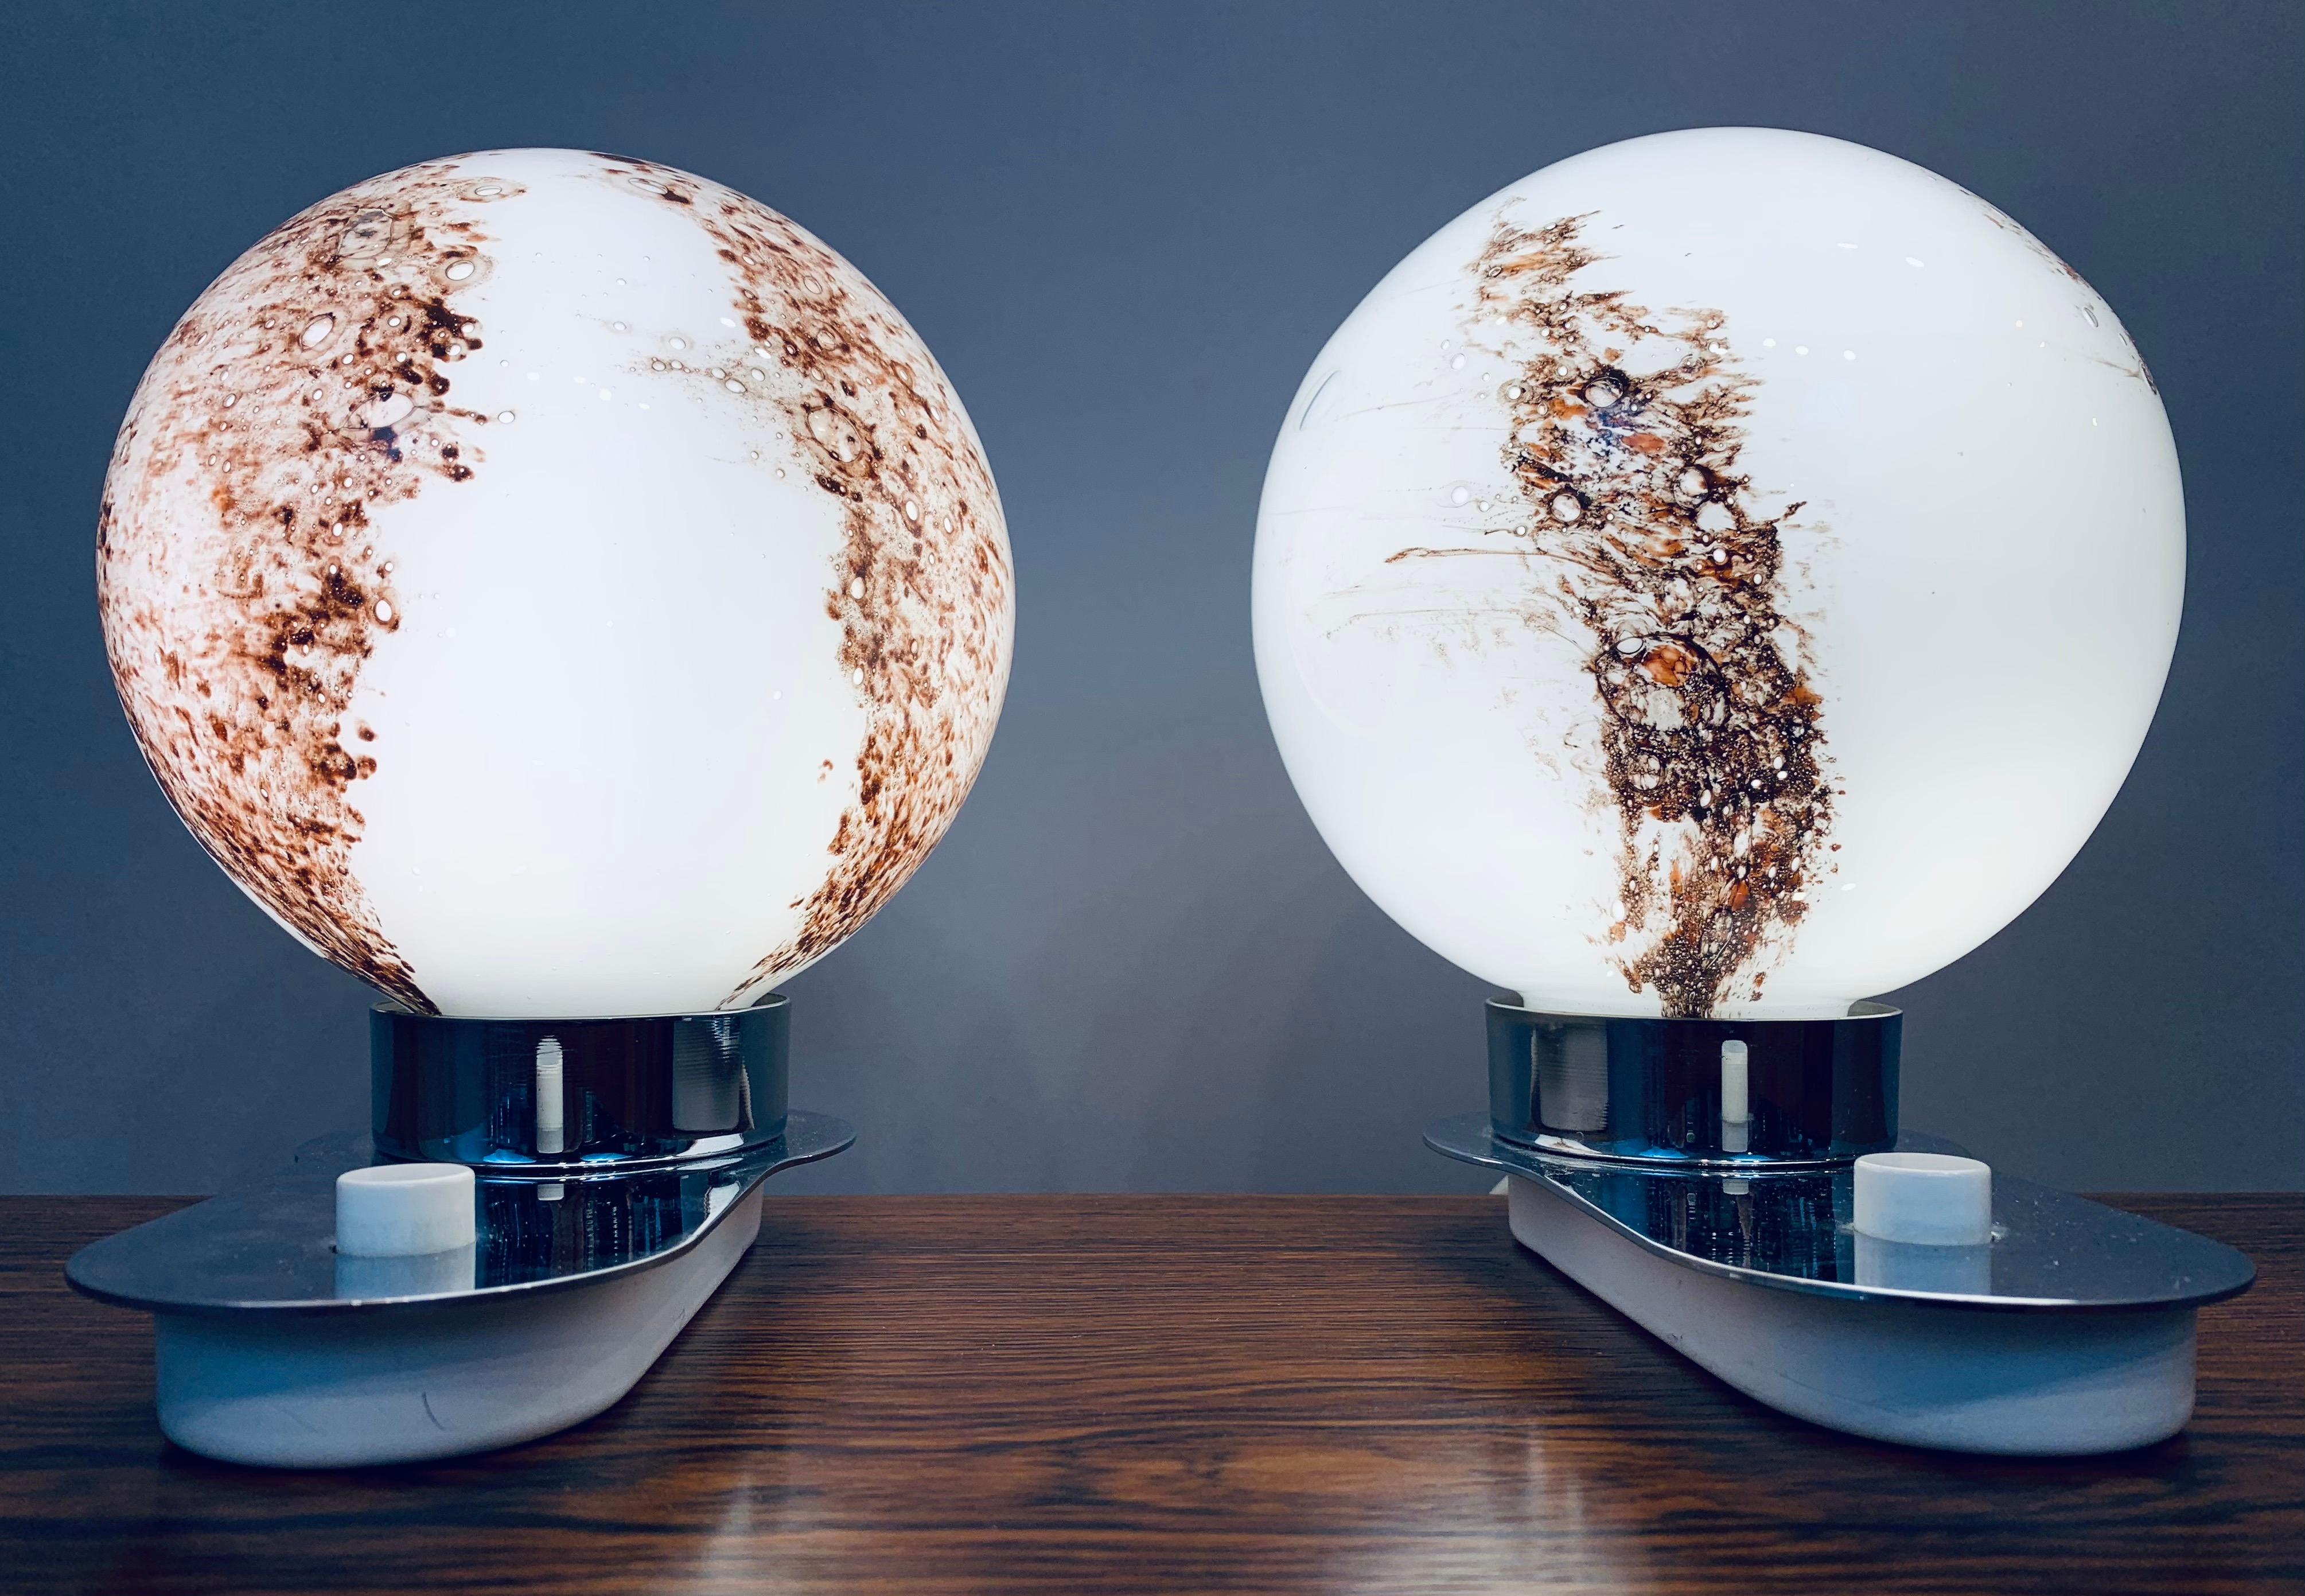 An interesting pair of 1970s German Doria Leuchten, illuminated, globe, decorative table lamps. Each globe sits on a chrome base with a white push button on/off switch. The lamps require a single E14 pygmy screw-in bulb. The globes screw off the